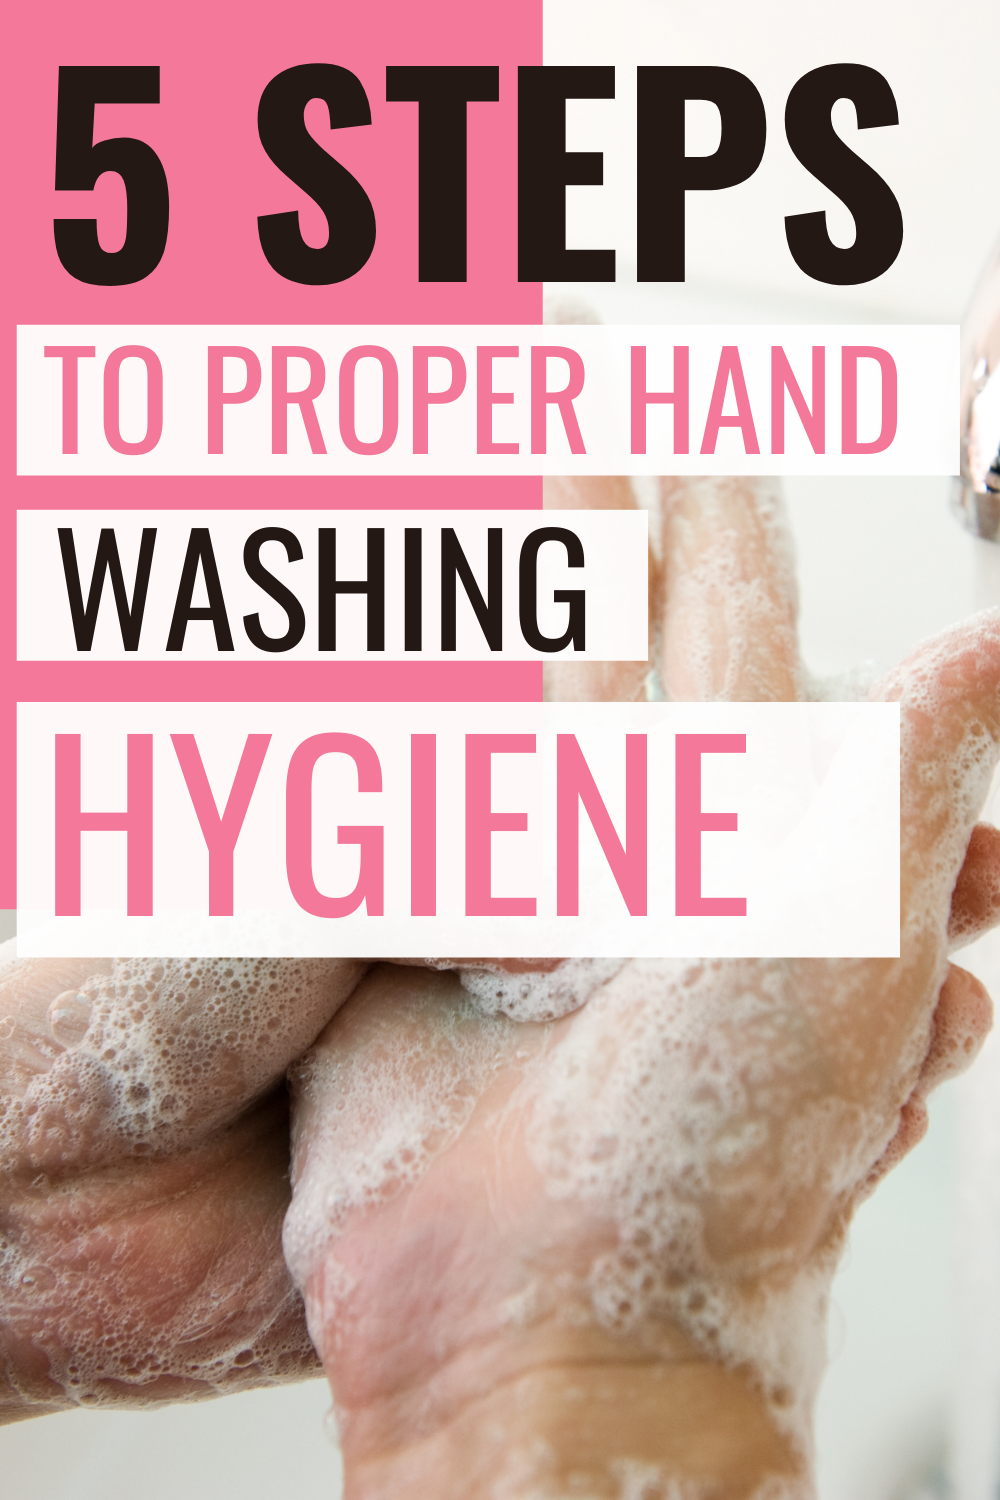 Keeping your hands clean is an important part of personal hygiene, and also helps to prevent the spread of germs and bacteria. Follow these 5 steps to handwashing, to make sure you're cleaning your hands properly.